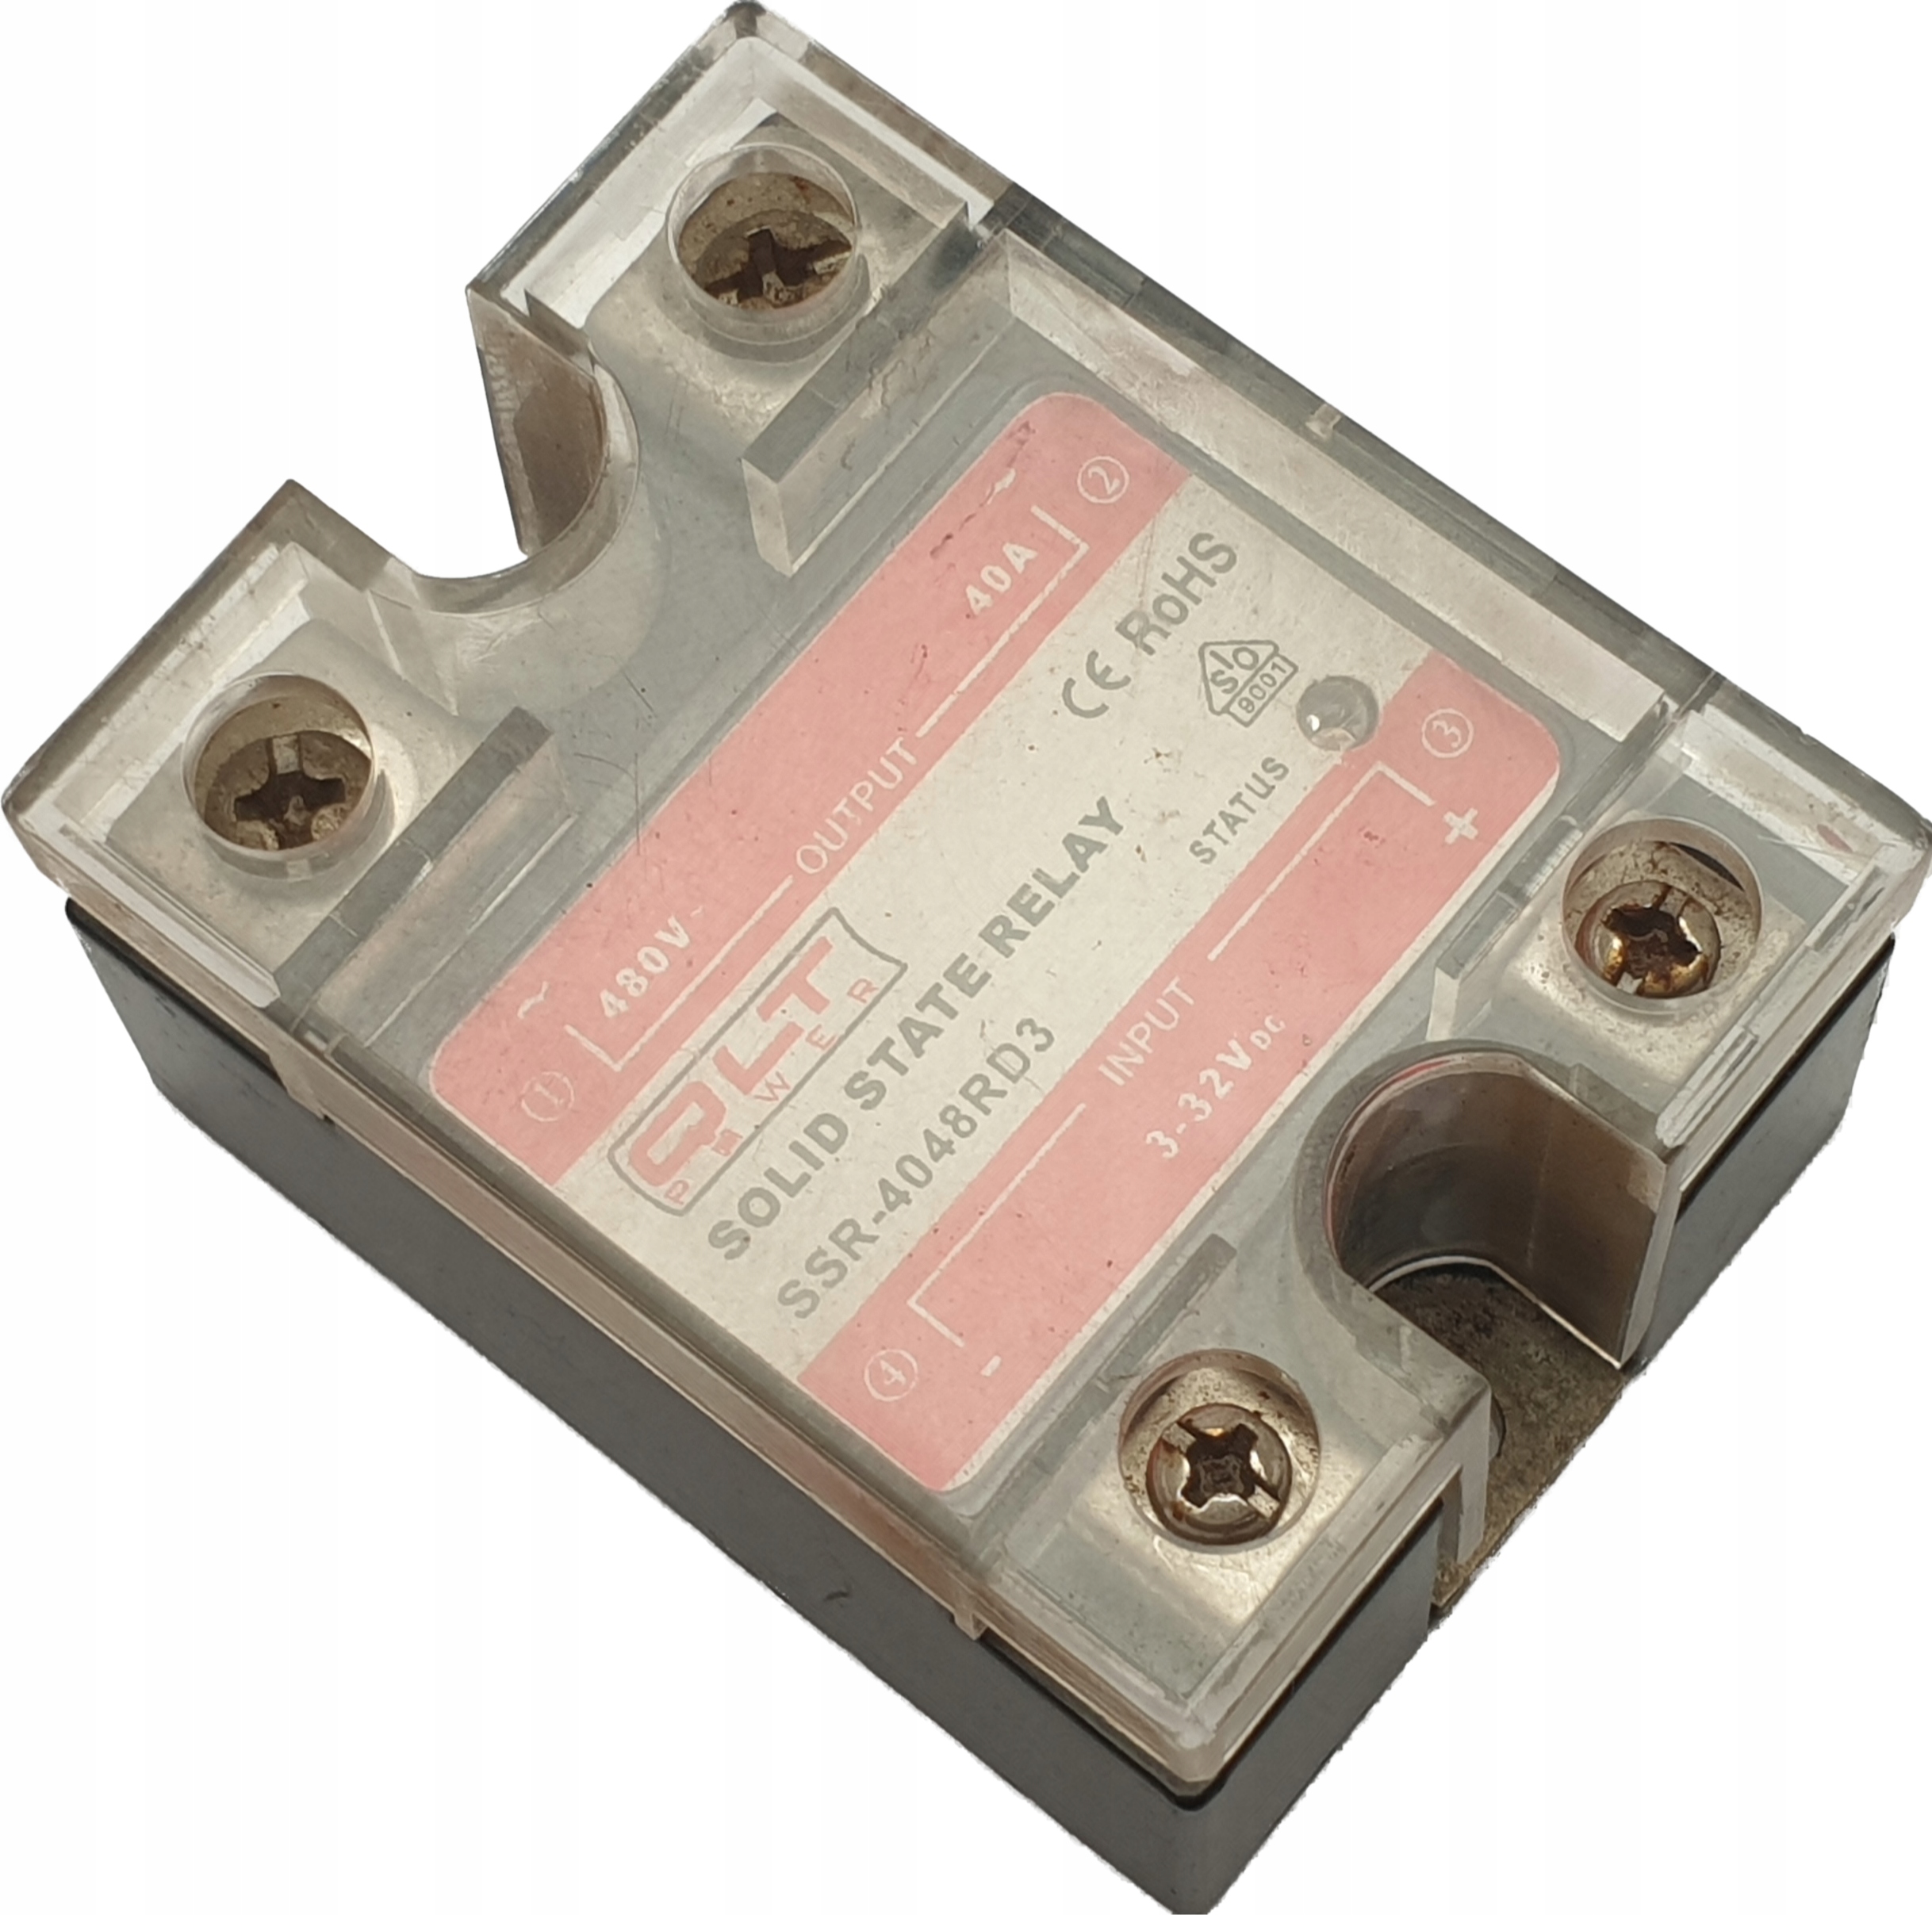 QLT POWER SSR-4048RD3 IN: 4-32VDC OUT: 480V 40A